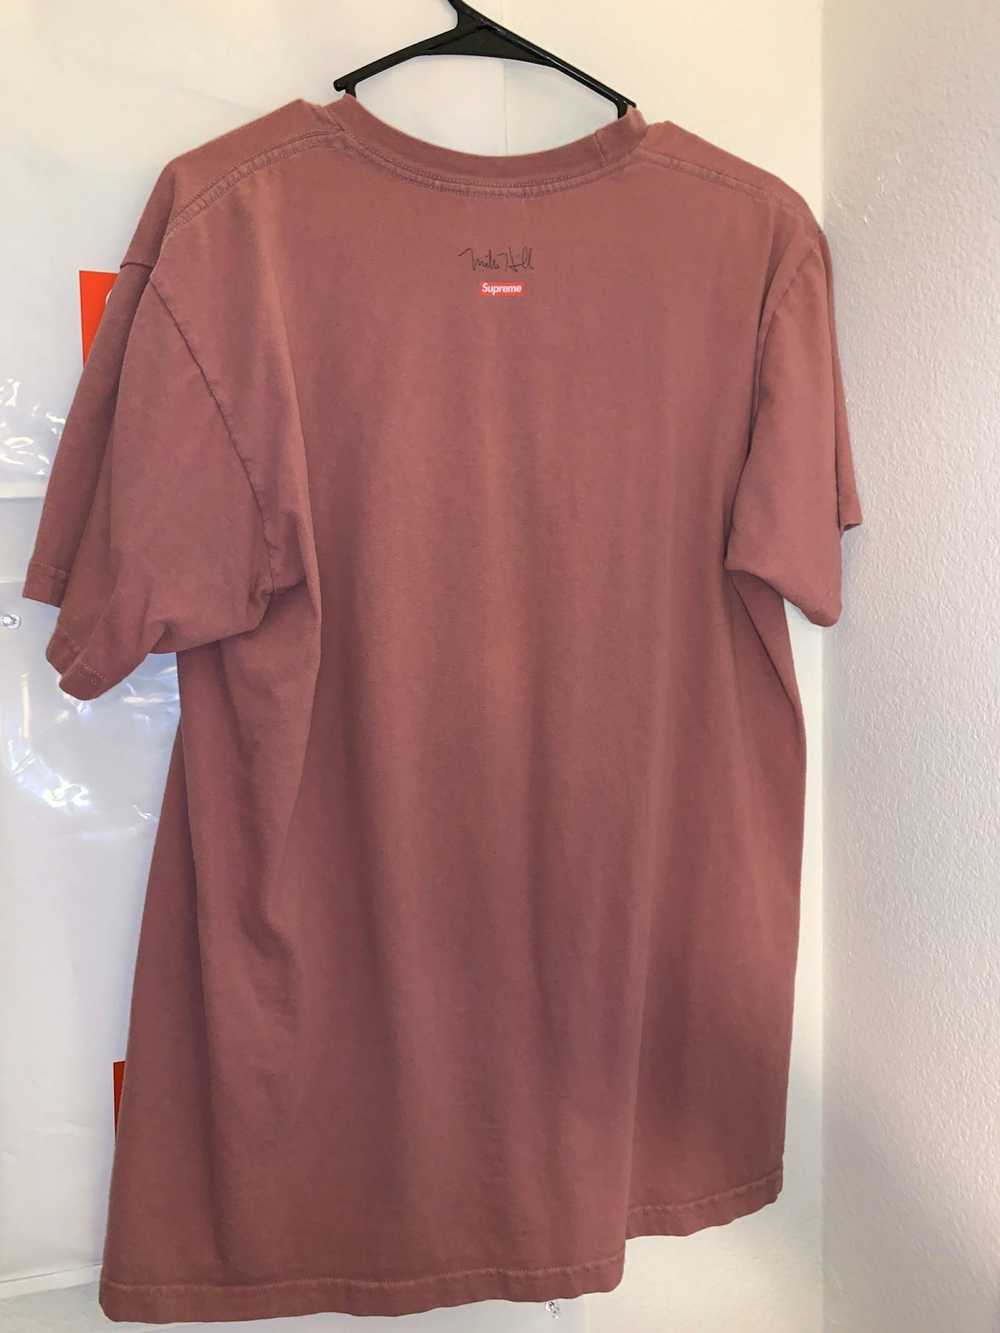 Supreme Mike Hill Runner Tee - image 3